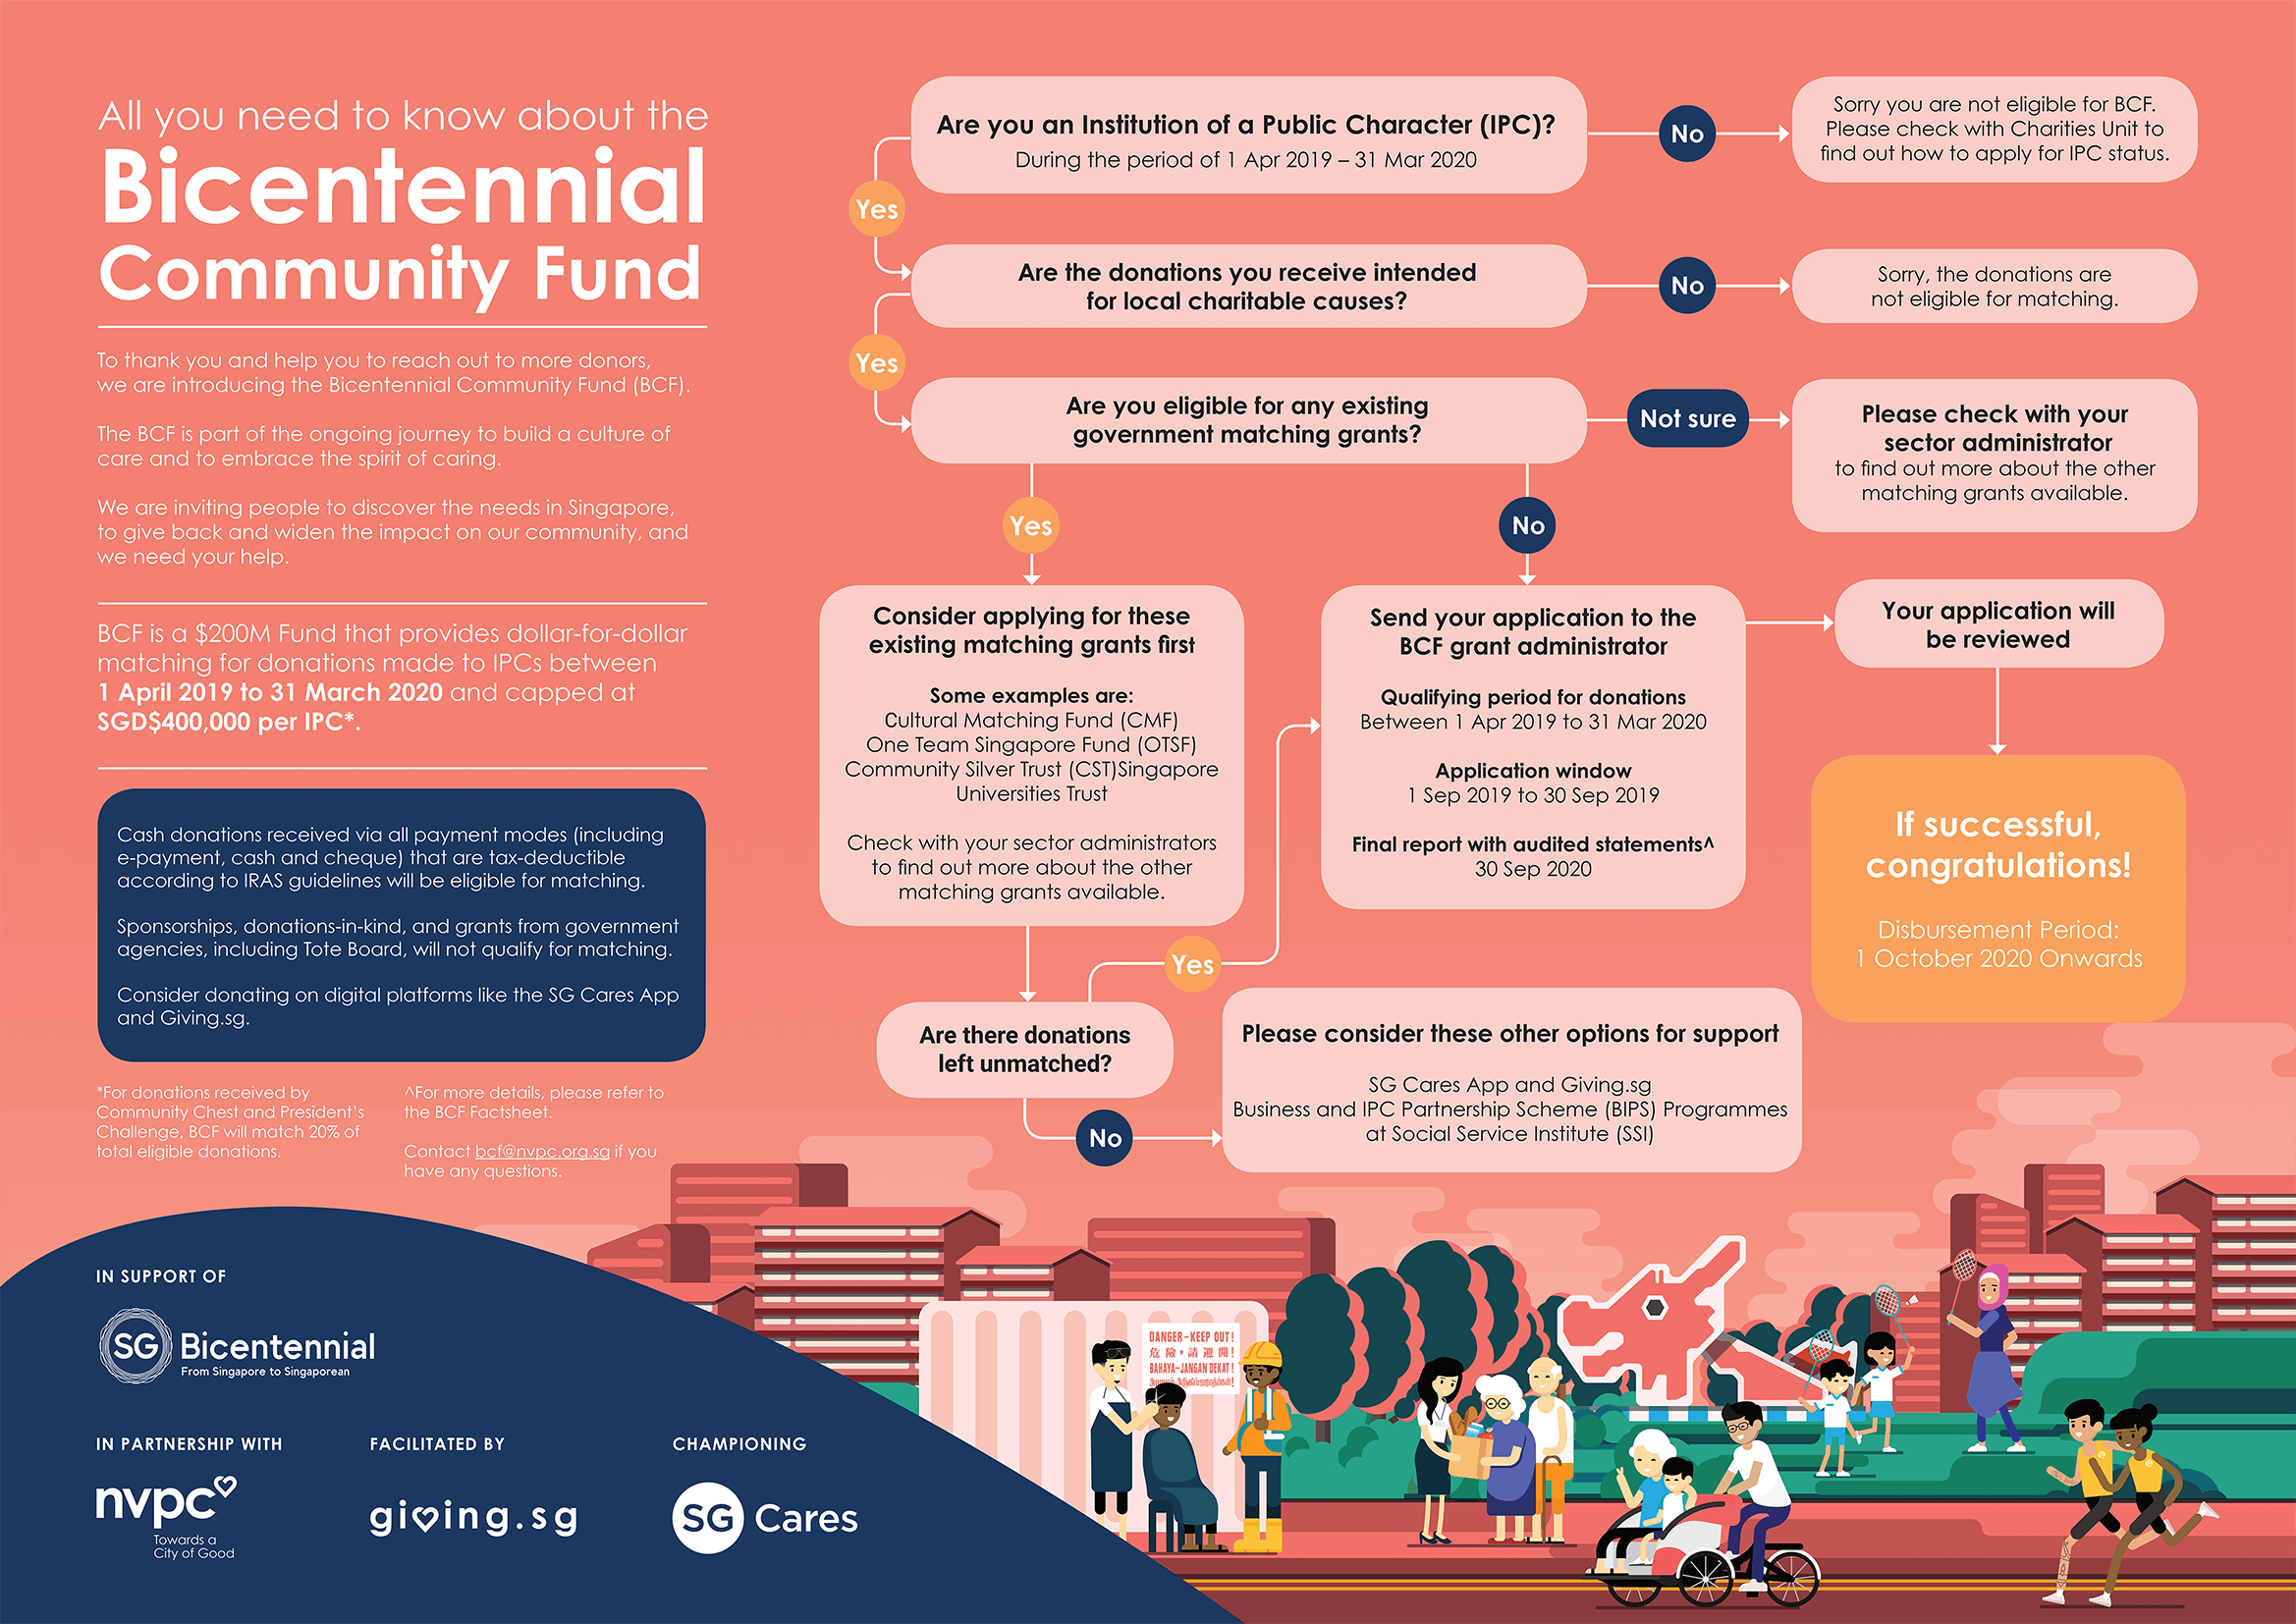 all you need to know about the bicentennial community fund flowchart